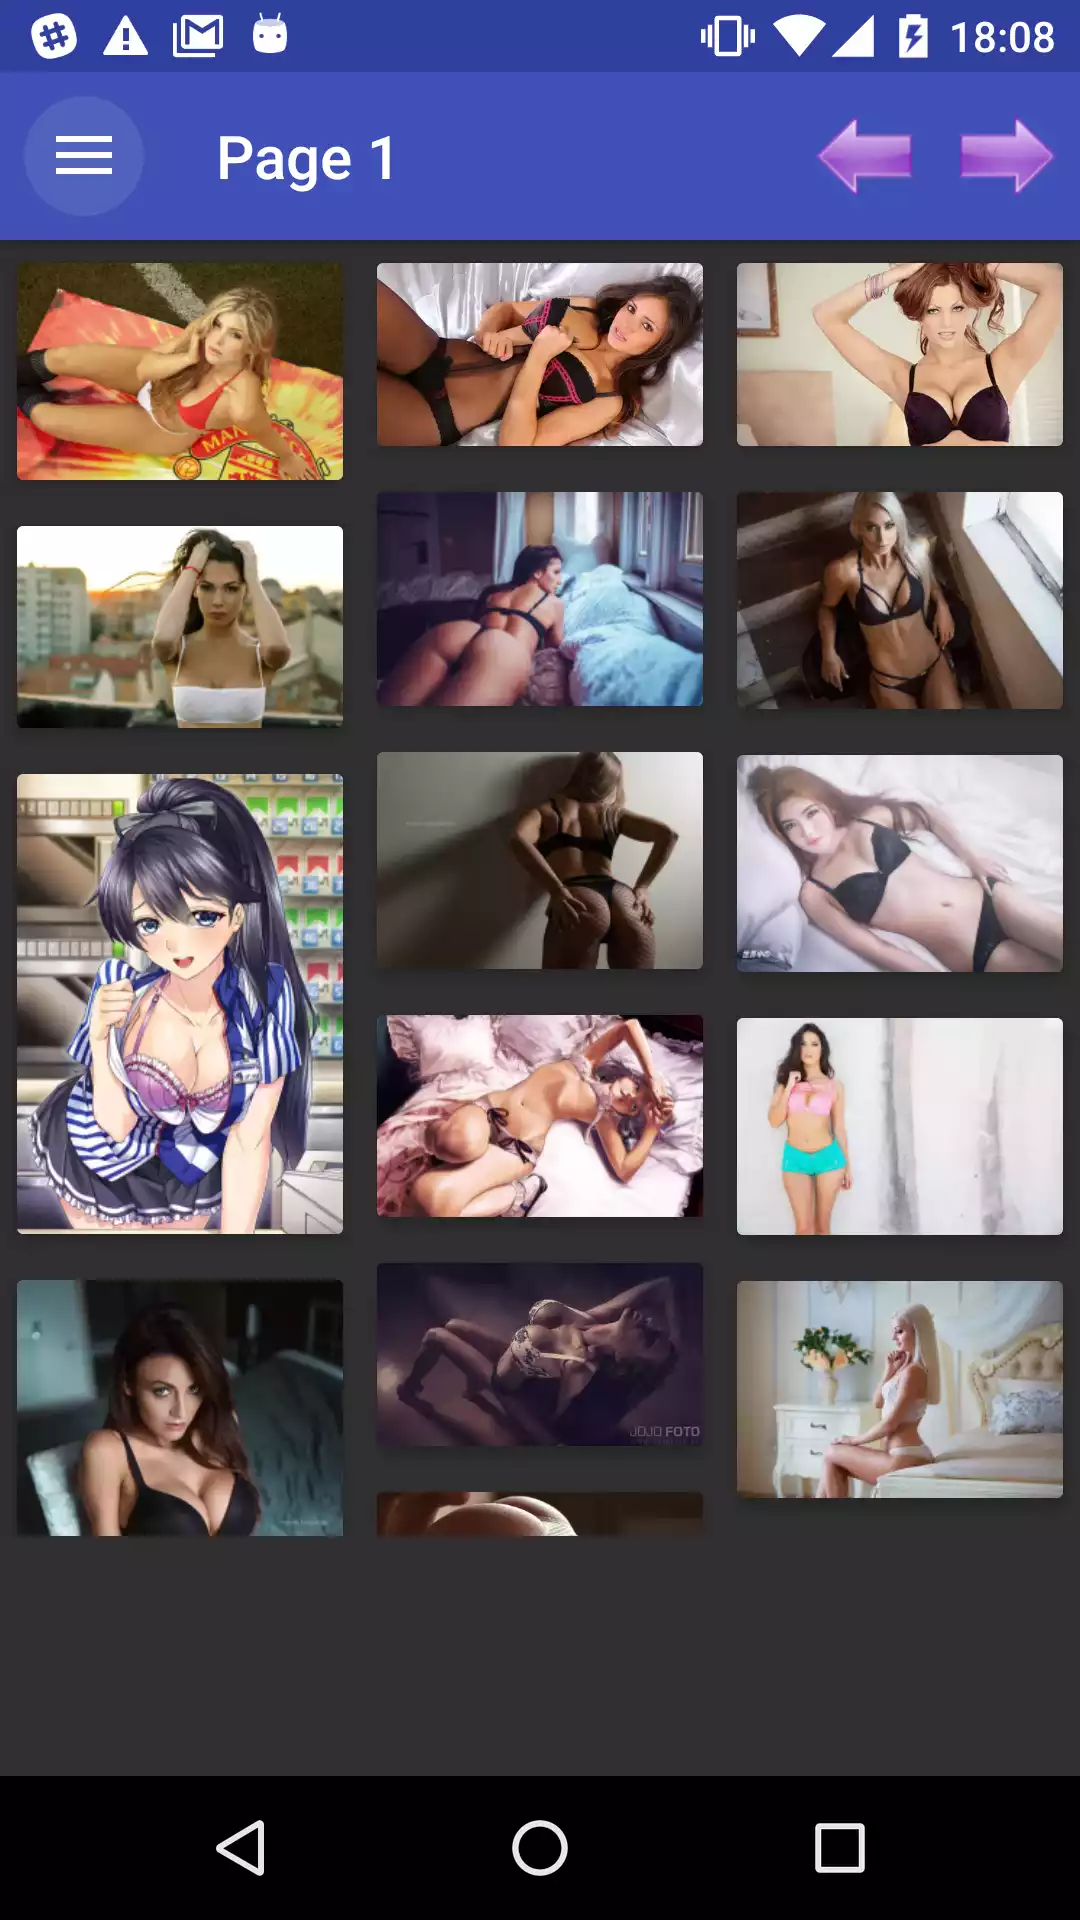 Bra Wallpapers sissy,immage,porn,pics,image,hentie,wallpapers,gallery,backgrounds,pic,wallpaper,apk,apps,sexy,anime,hentia,photos,images,android,hantai,new,pictures,hentai